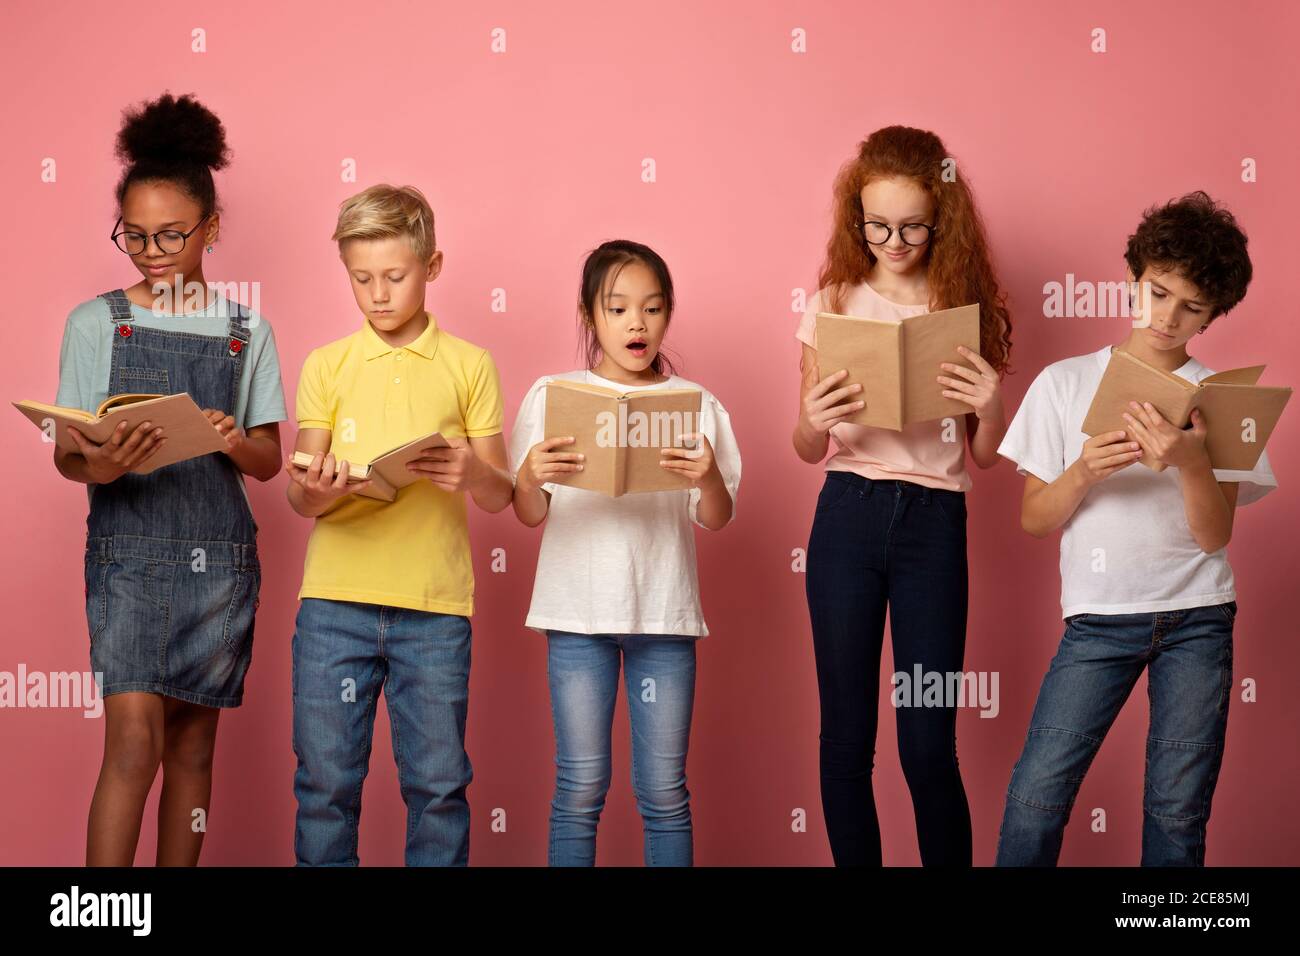 Focused diverse schoolkids reading books over pink background Stock Photo